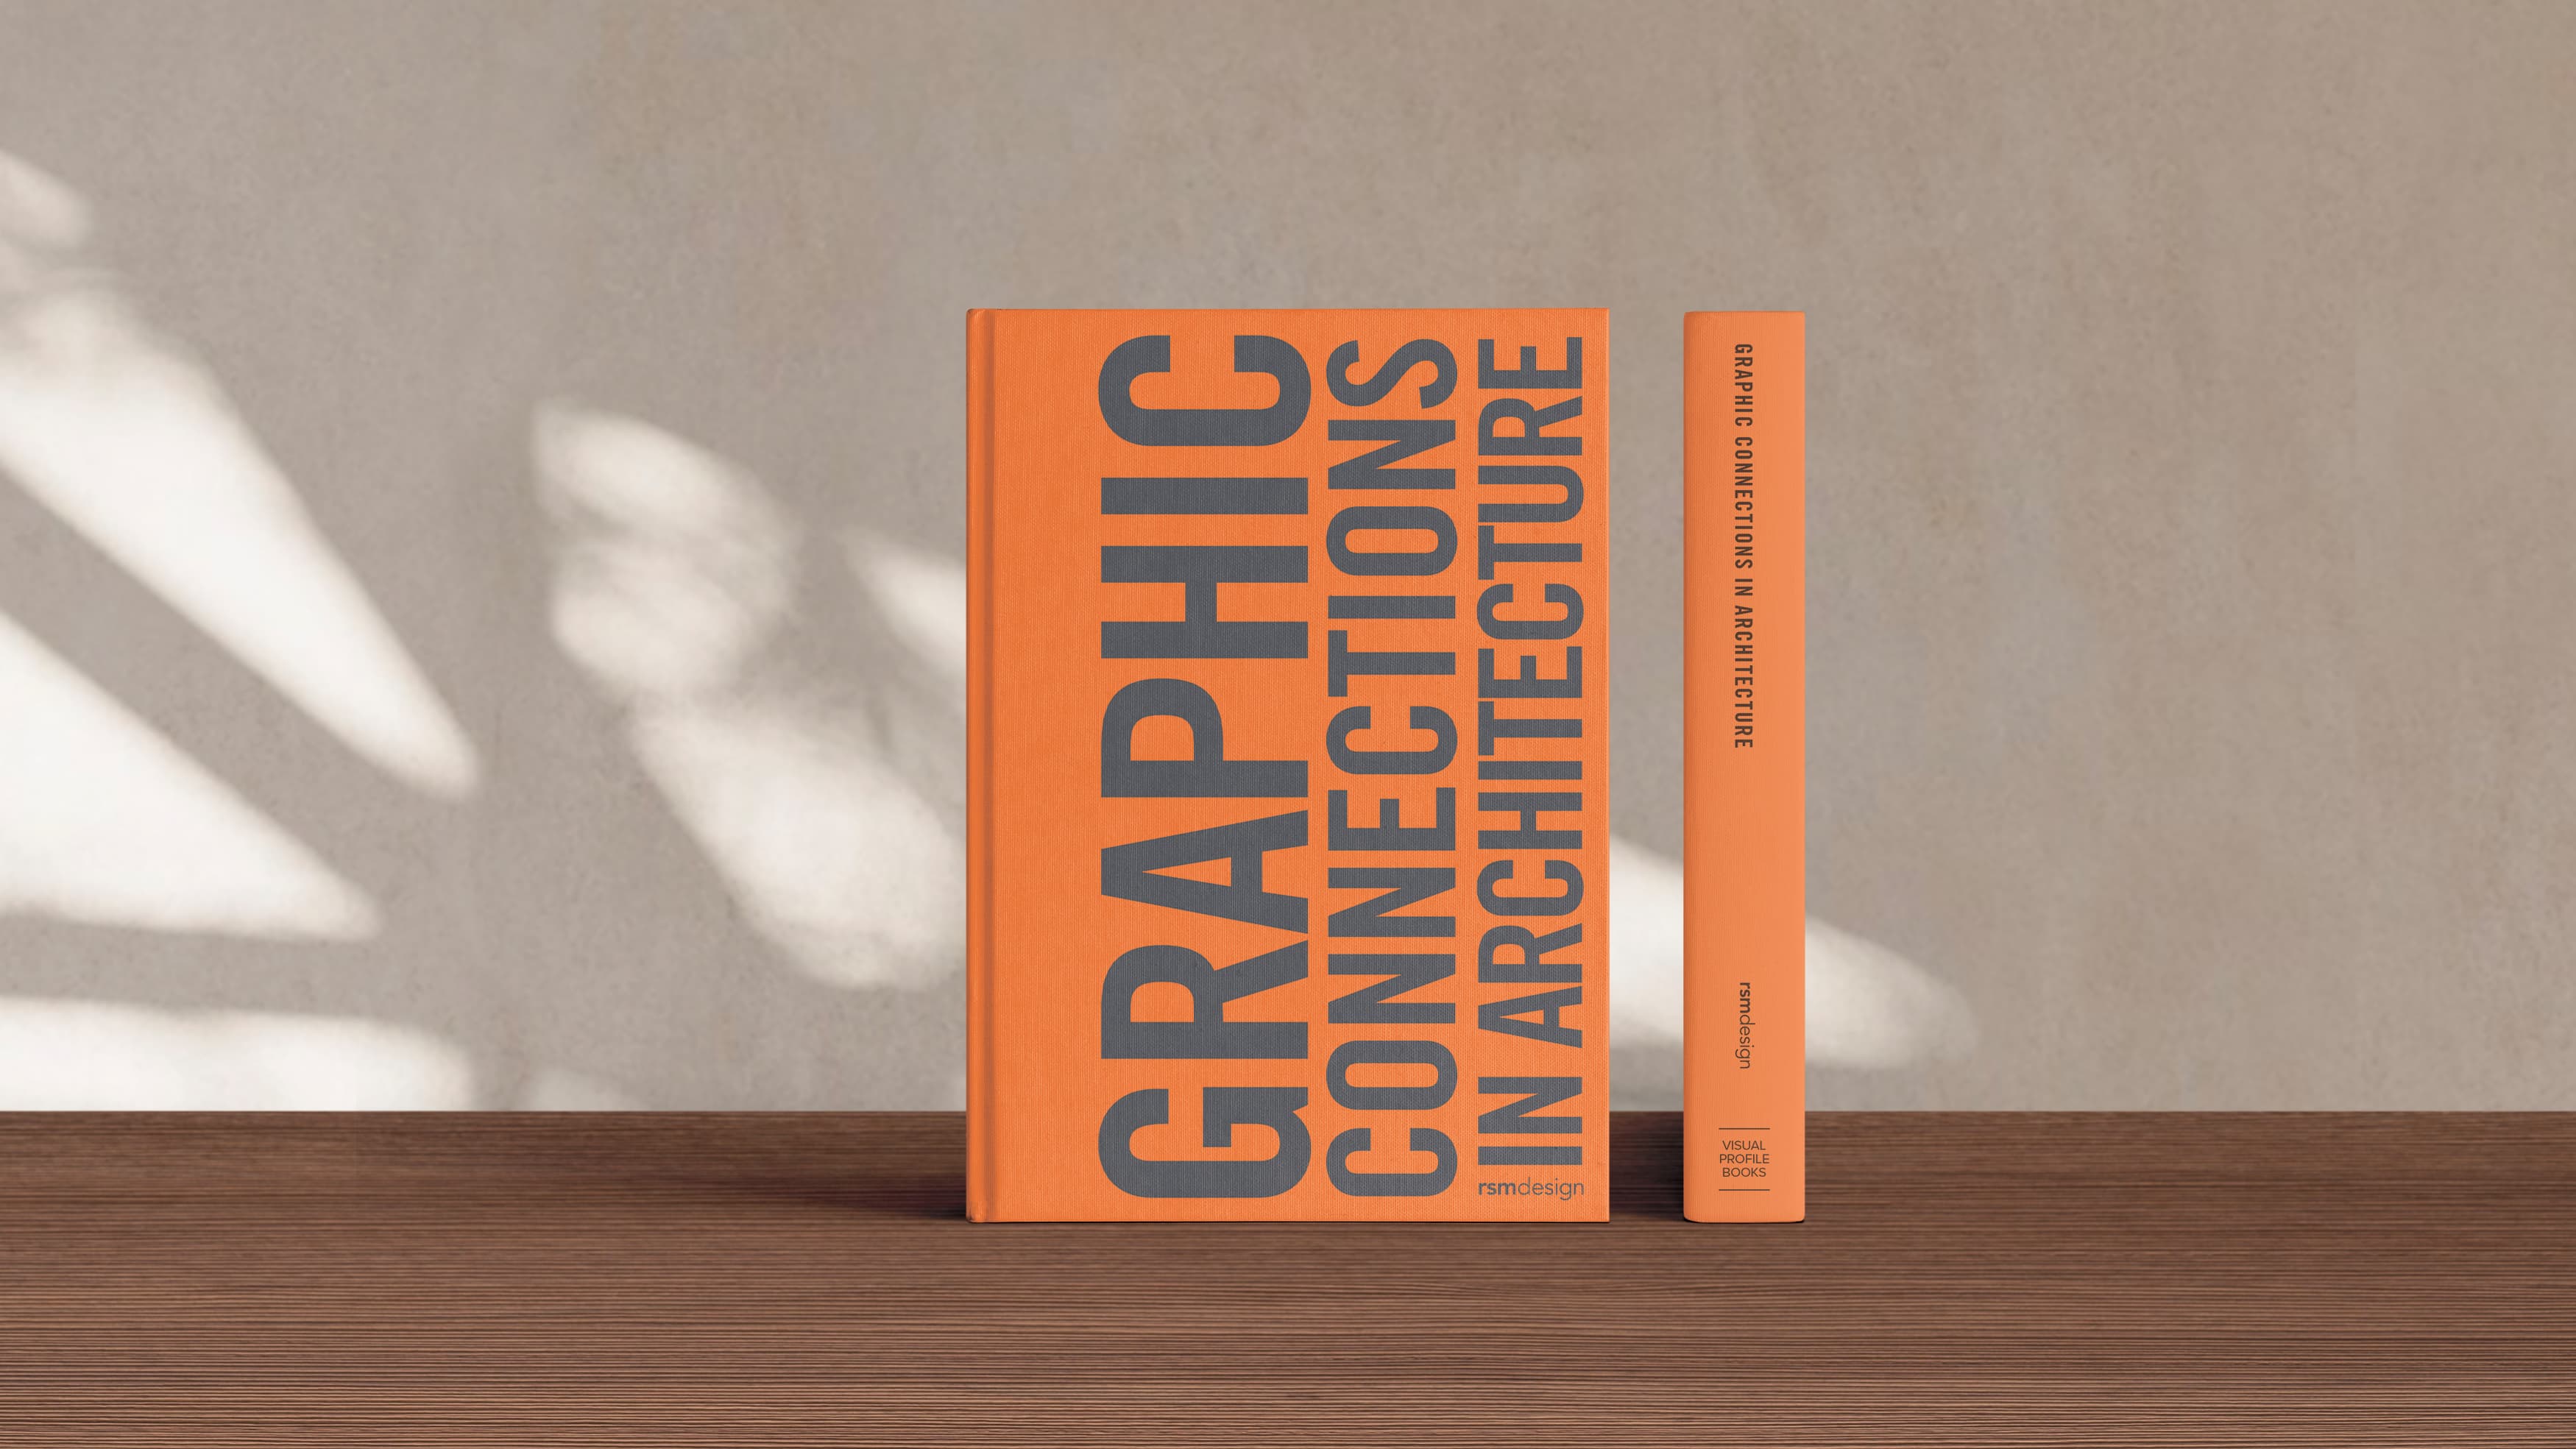 RSM Design's newest book, Graphic Connections in Architecture, sits on a hardwood table.